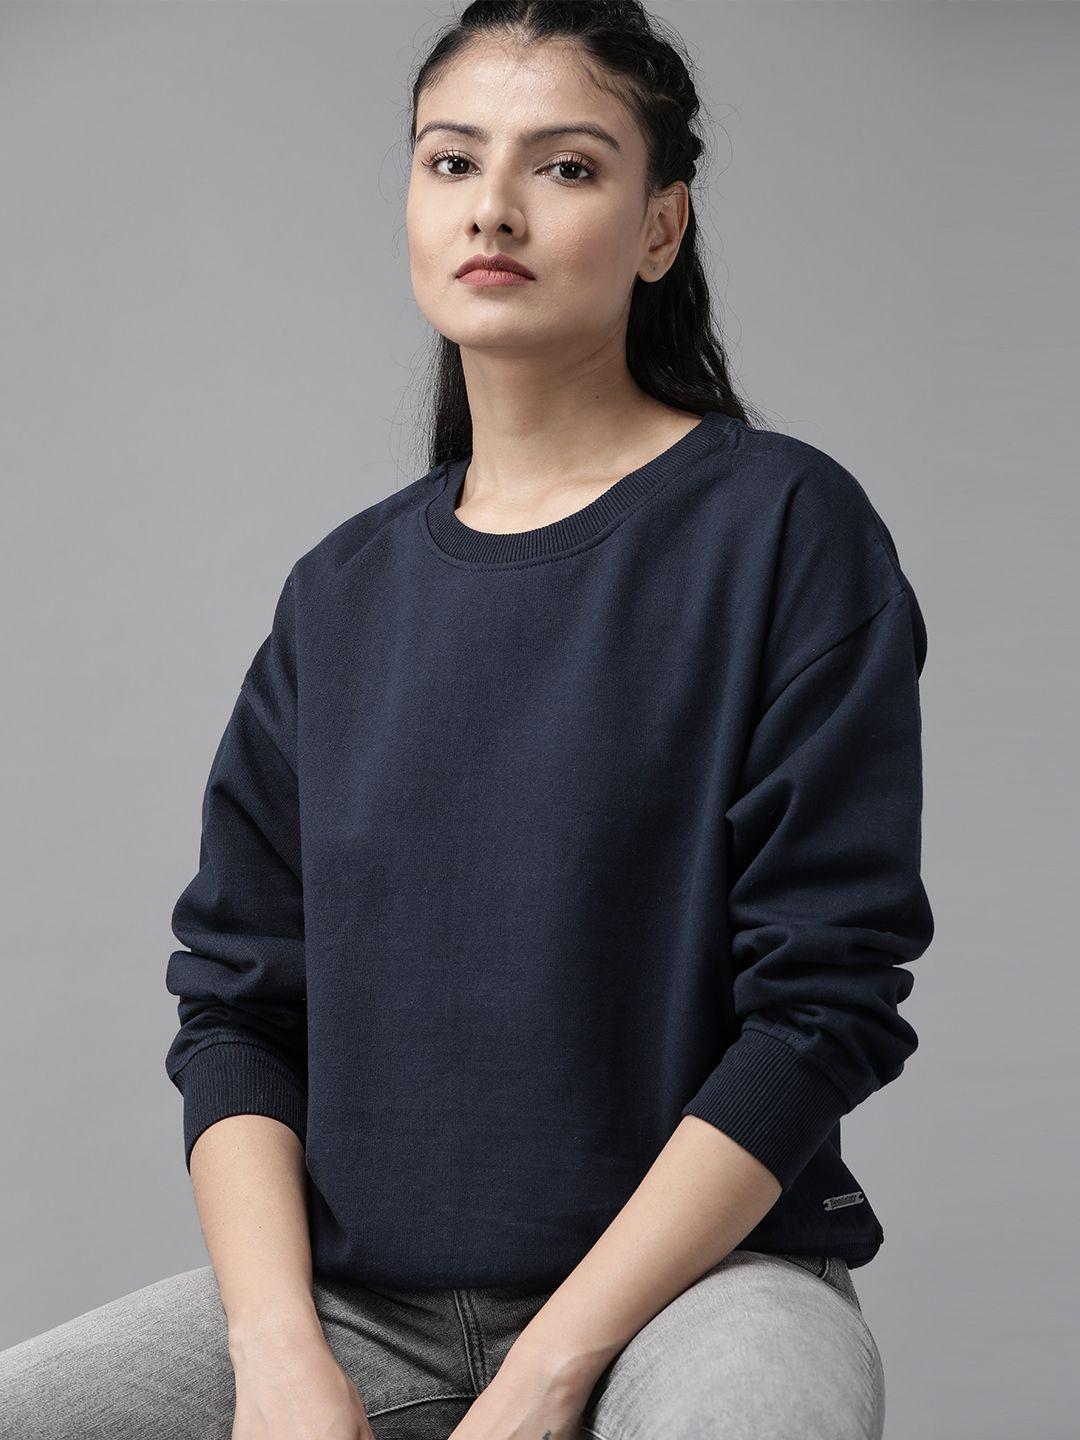 the-roadster-lifestyle-co-women-navy-blue-boxy-fit-solid-sweatshirt